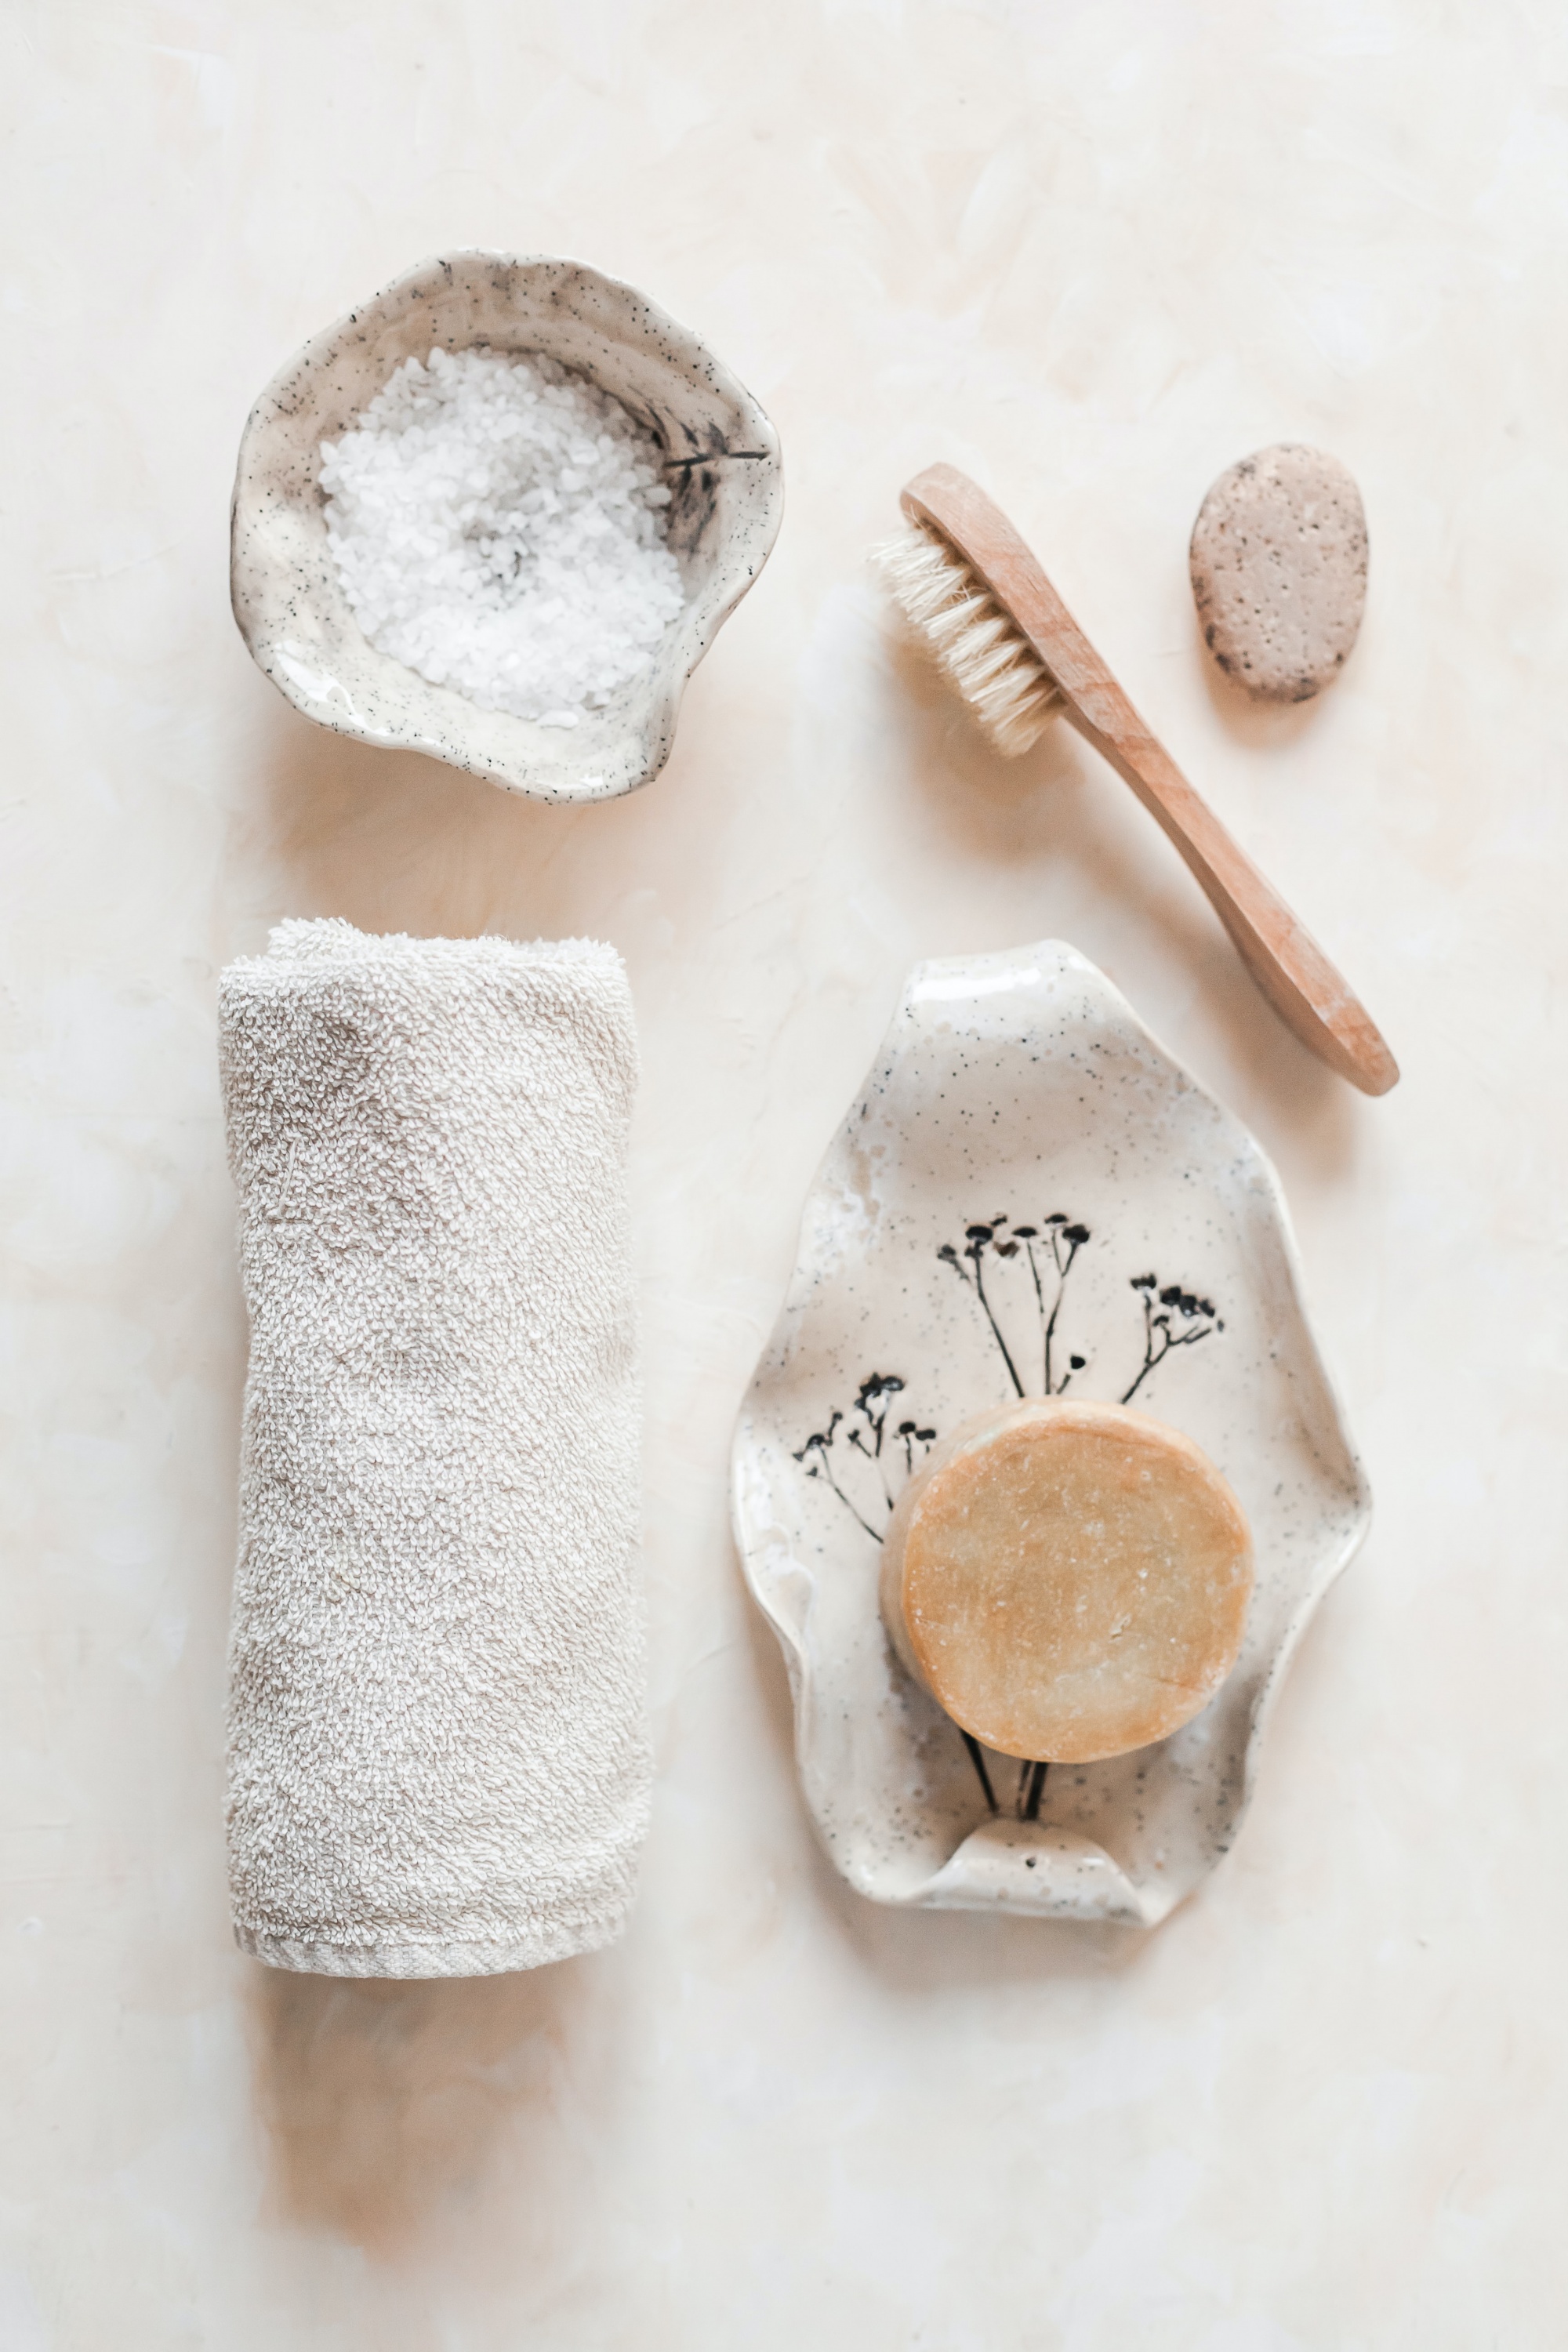 How To Exfoliate Over 40, sharing how to exfoliate your skin as a woman over 40 and why it's important including physical exfoliate